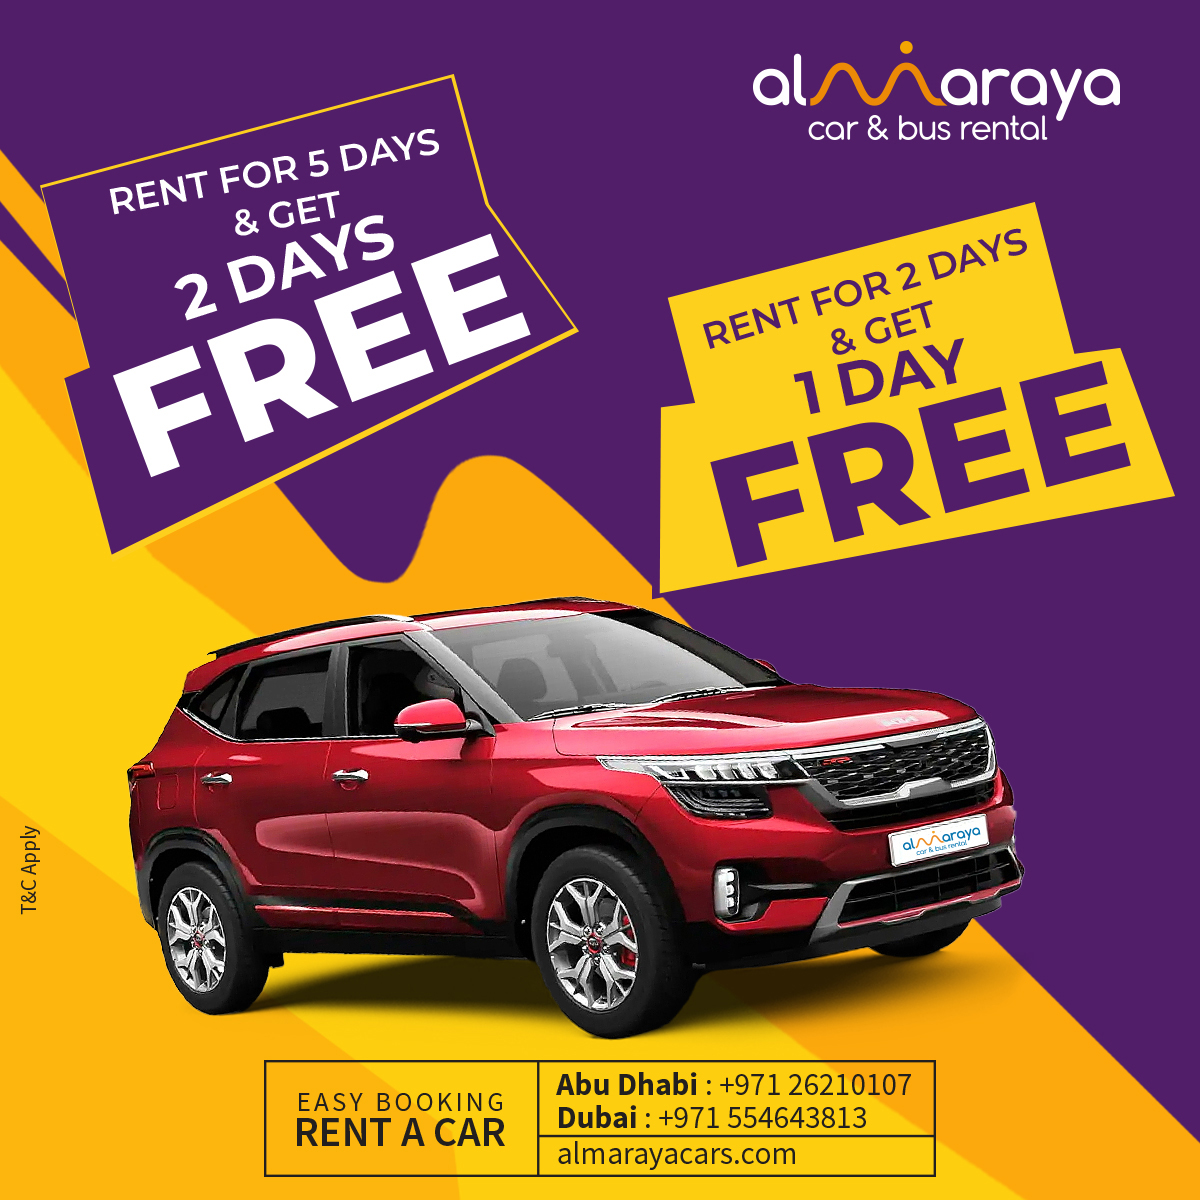 Explore the world with #Almaraya Rent a Car! Don't miss out on this amazing offer to make your journey even more rewarding. Book your car now and enjoy the freedom of the open road!

#freeoffer #offers #CarRentalUAE #carrental #uaecars #rentacar #carrentals #carrentalservice